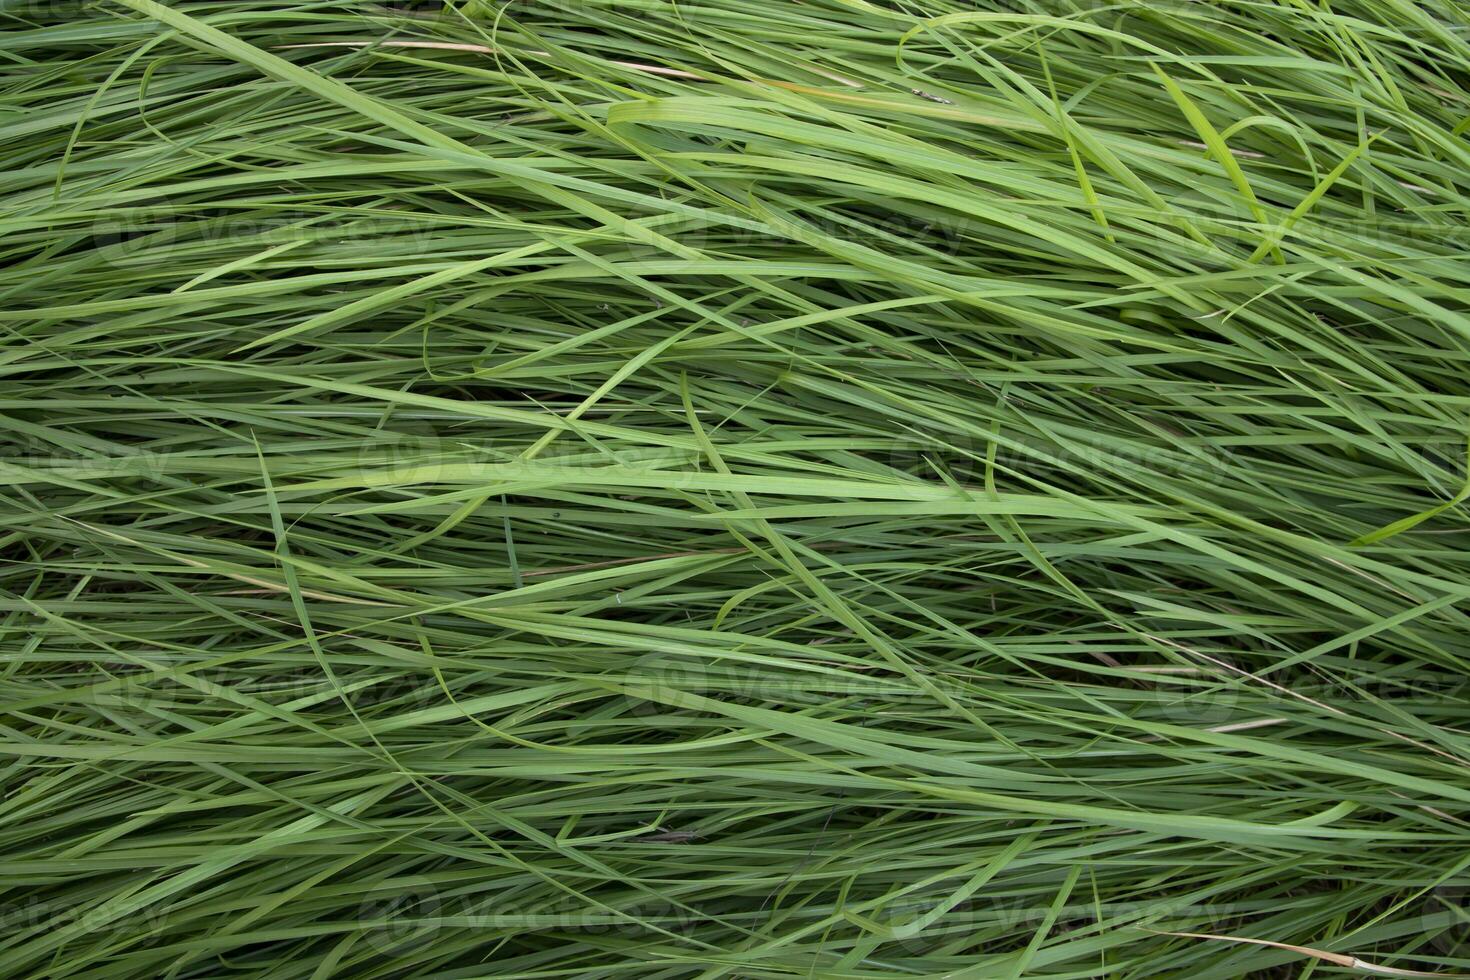 Green long grass pattern texture can be used as a natural background wallpaper photo